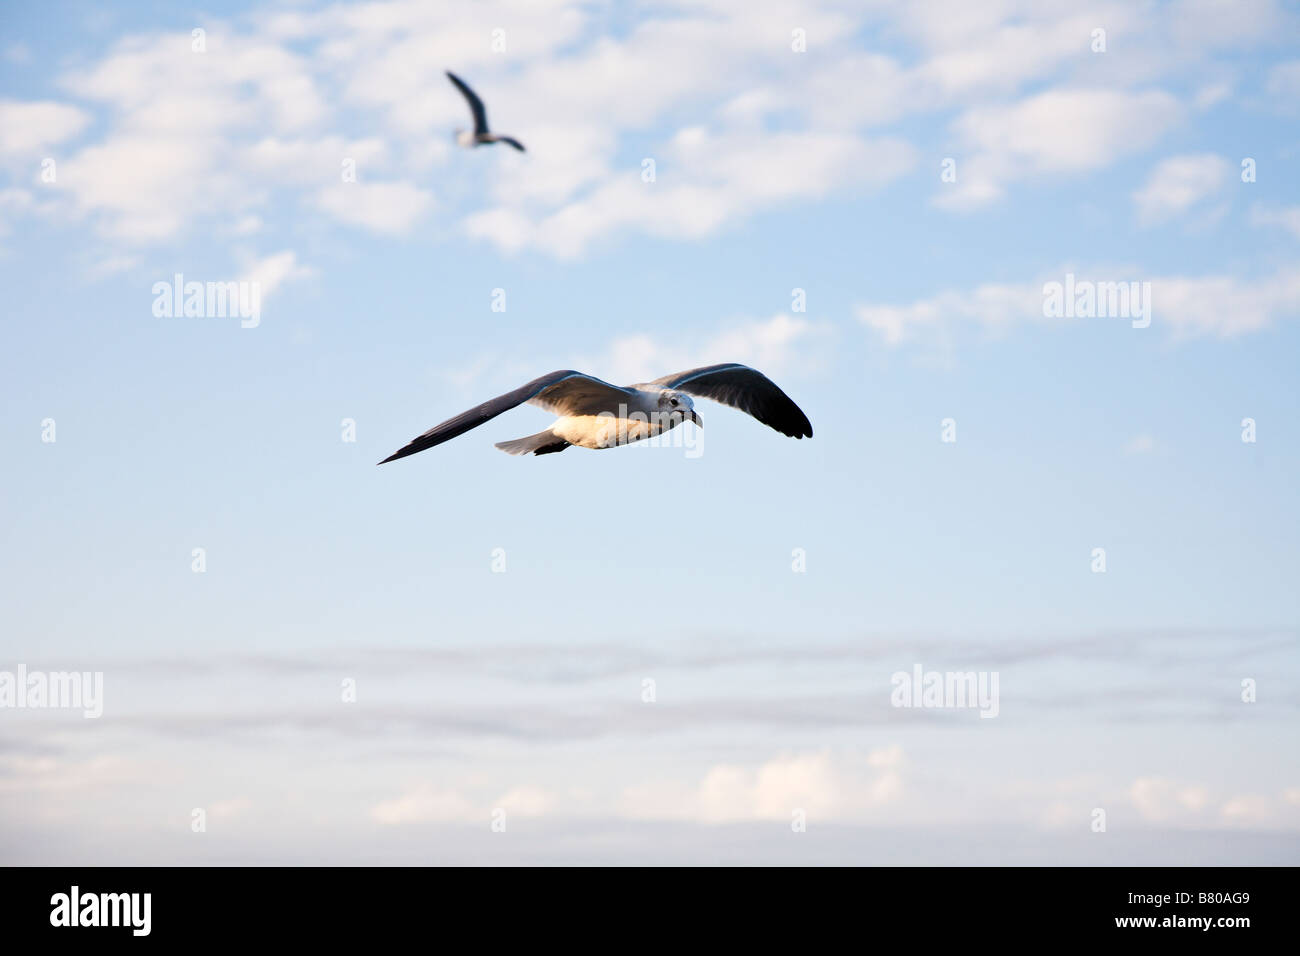 Two seagulls flying across blue sky Stock Photo